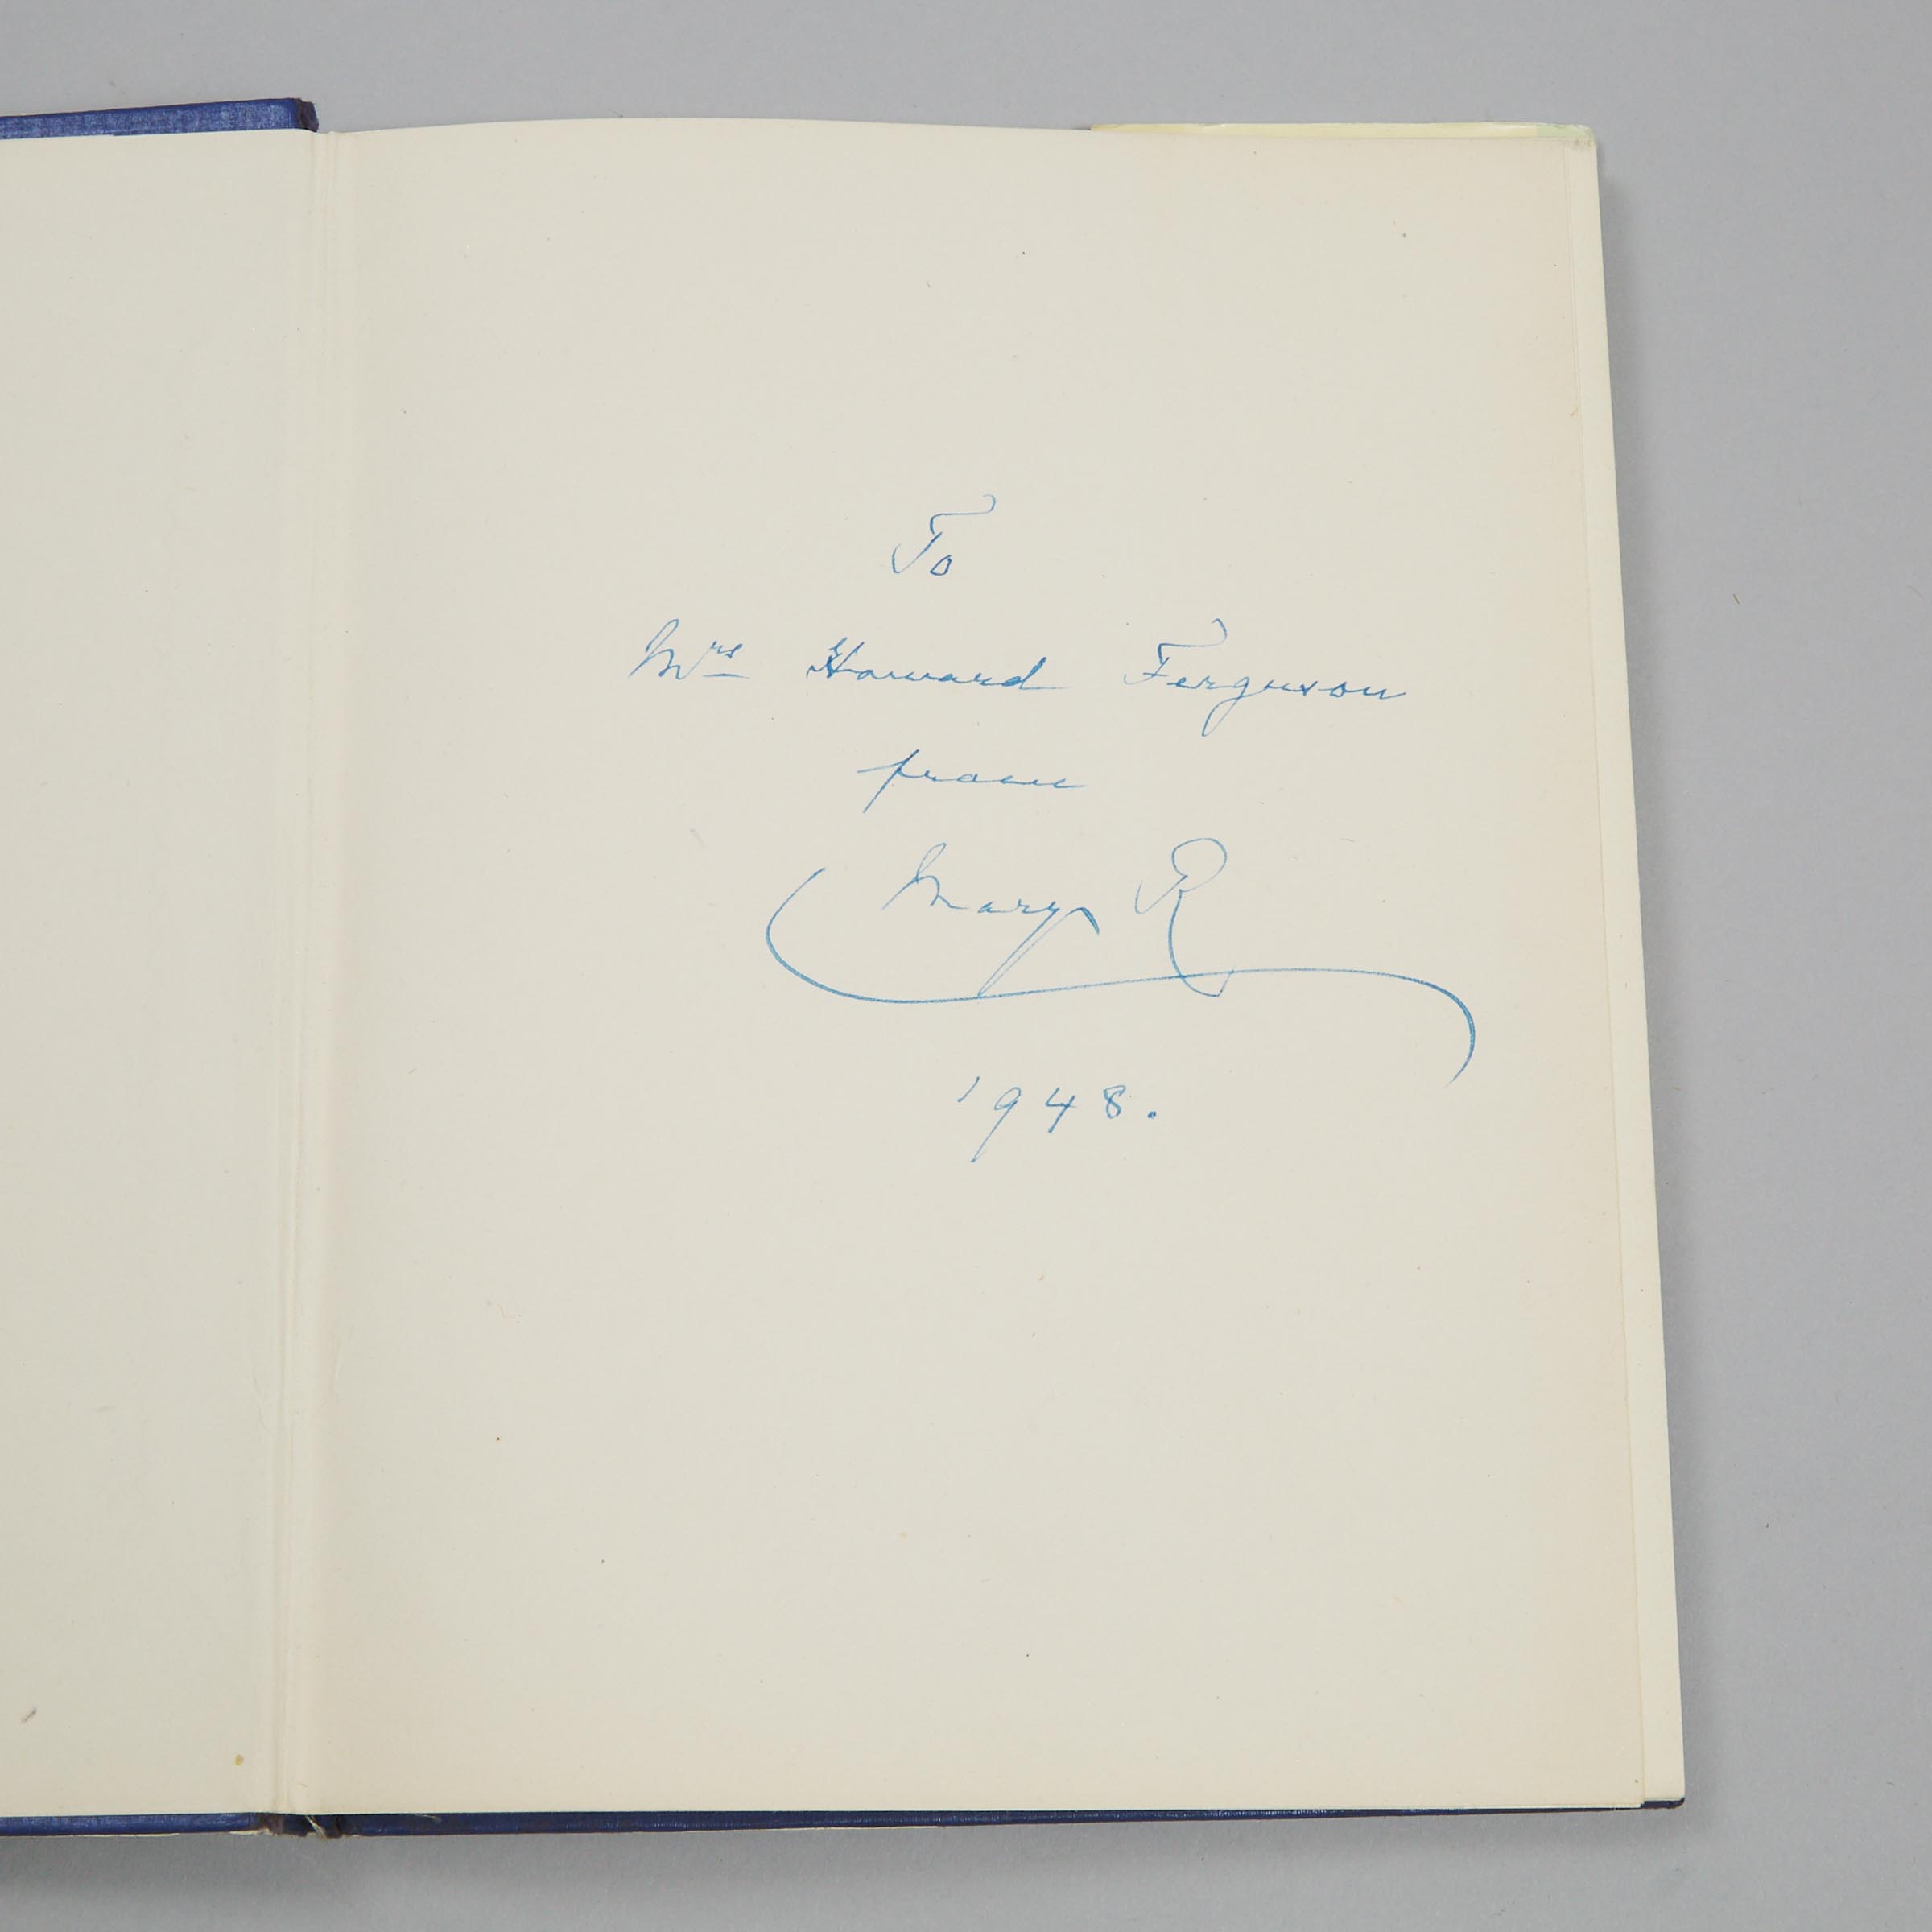 Signed Royal Presentation Copy of 'Silver Wedding, The Record of Twenty-Five Royal Years', 1948